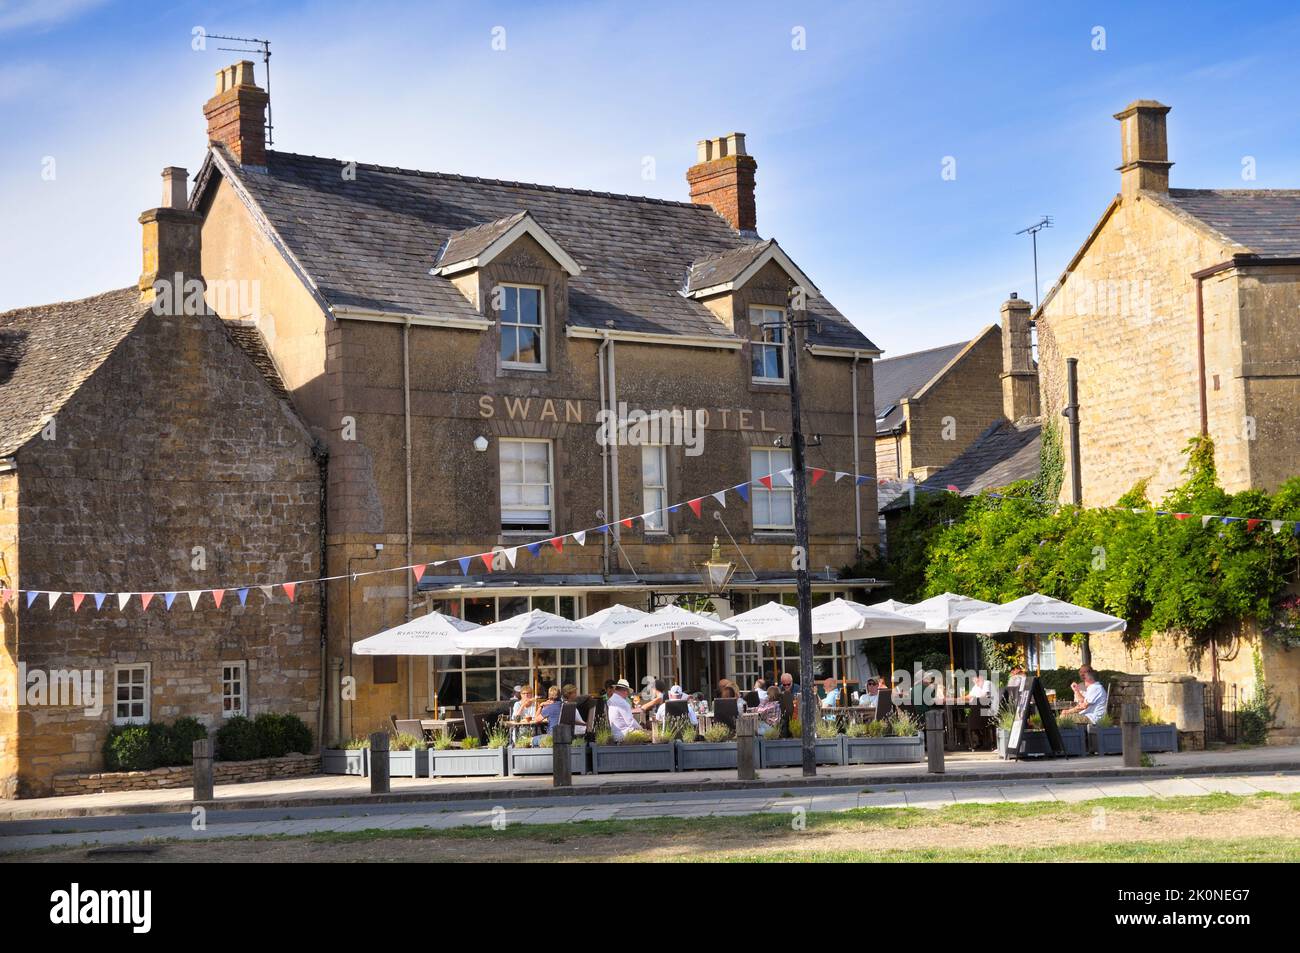 The Swan, a popular modern pub and restaurant in the picturesque Cotswold village of Broadway, Cotswolds, Worcestershire, England, UK Stock Photo